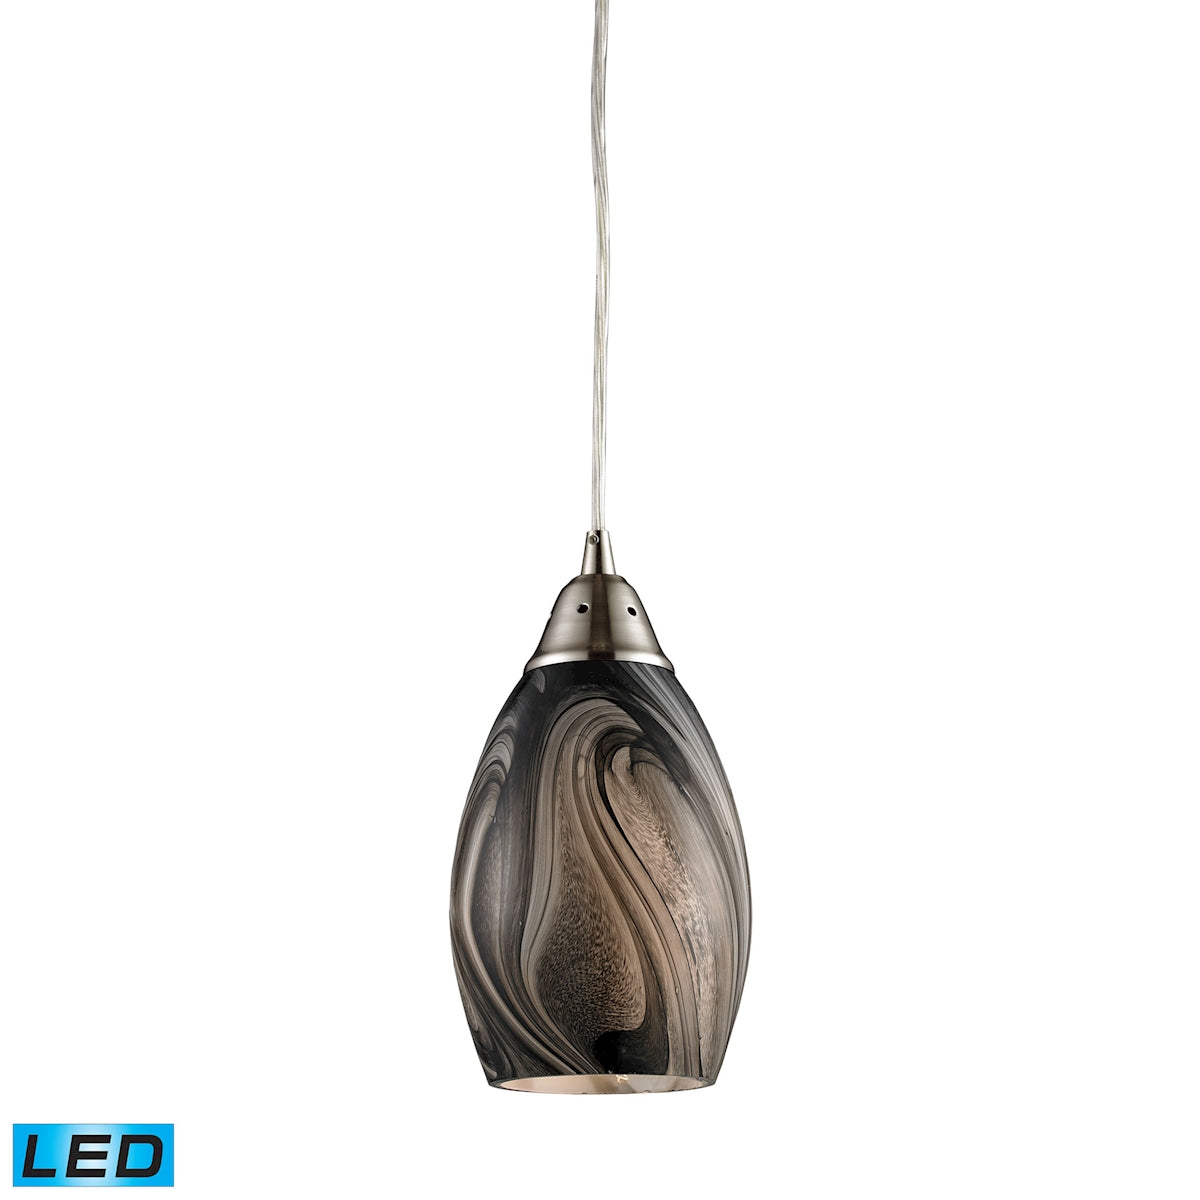 ELK Lighting 31133/1ASH-LED Formations 1-Light Mini Pendant in Satin Nickel with Ashflow Glass - Includes LED Bulb